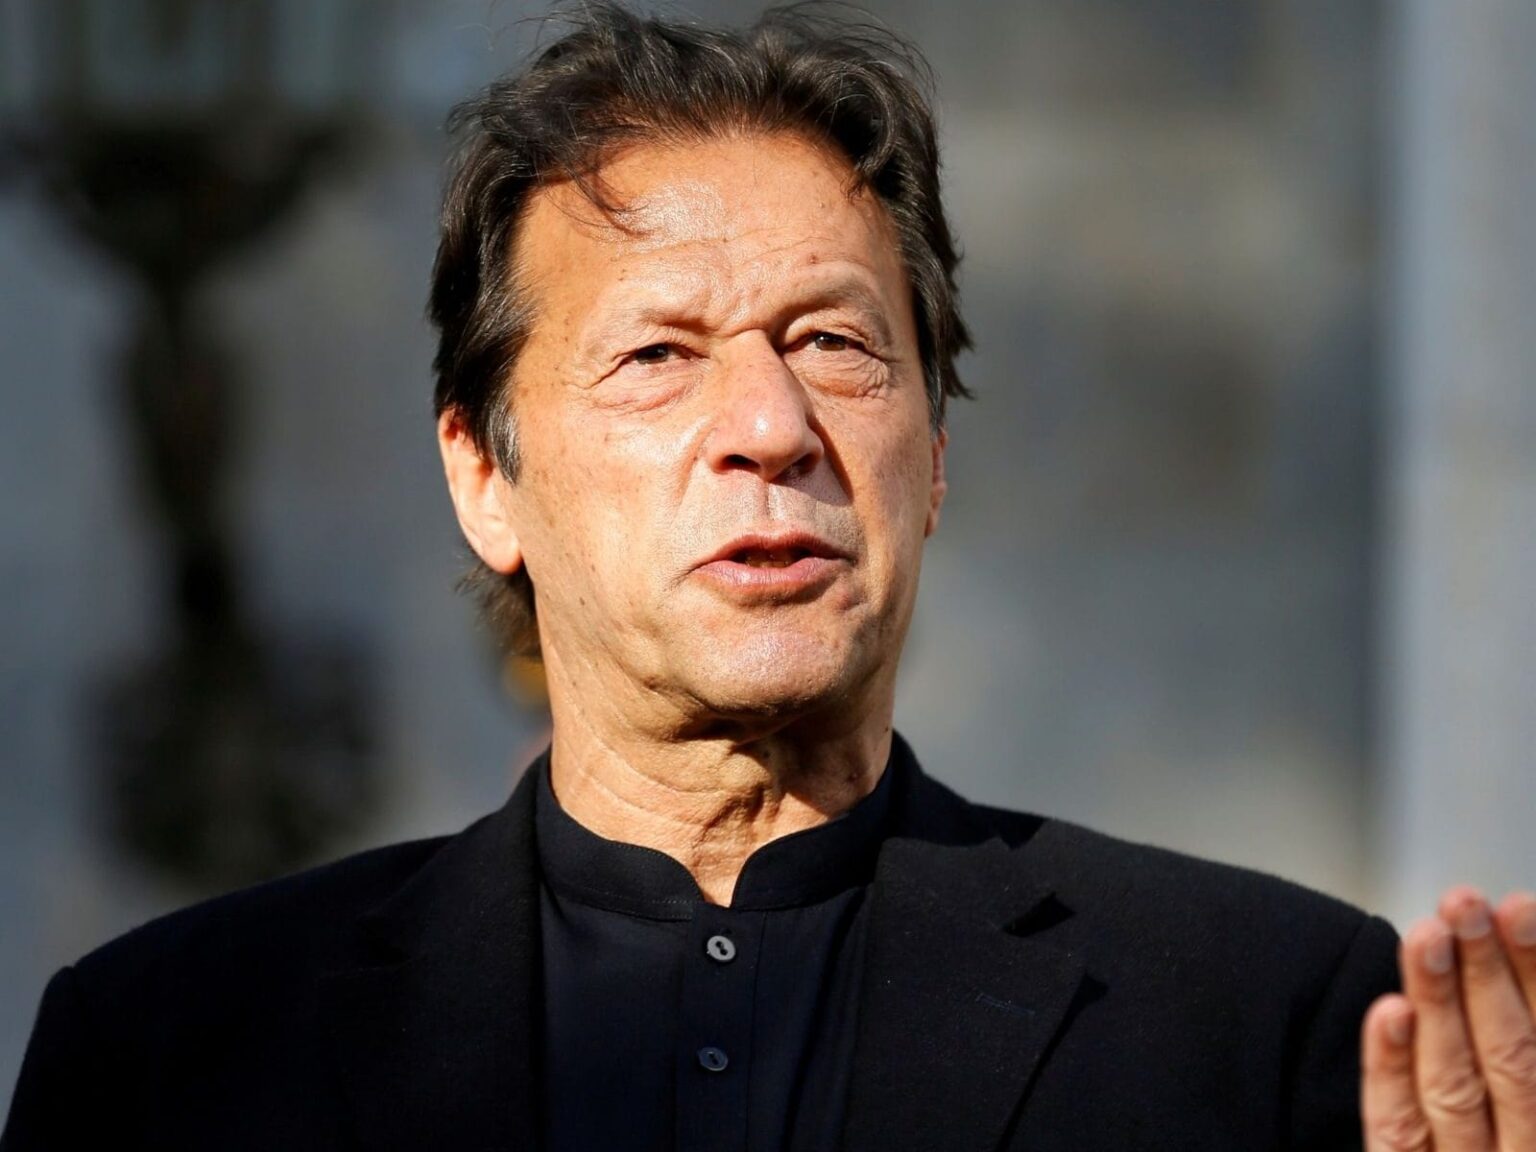 Pakistan’s military and the US remove Imran from power